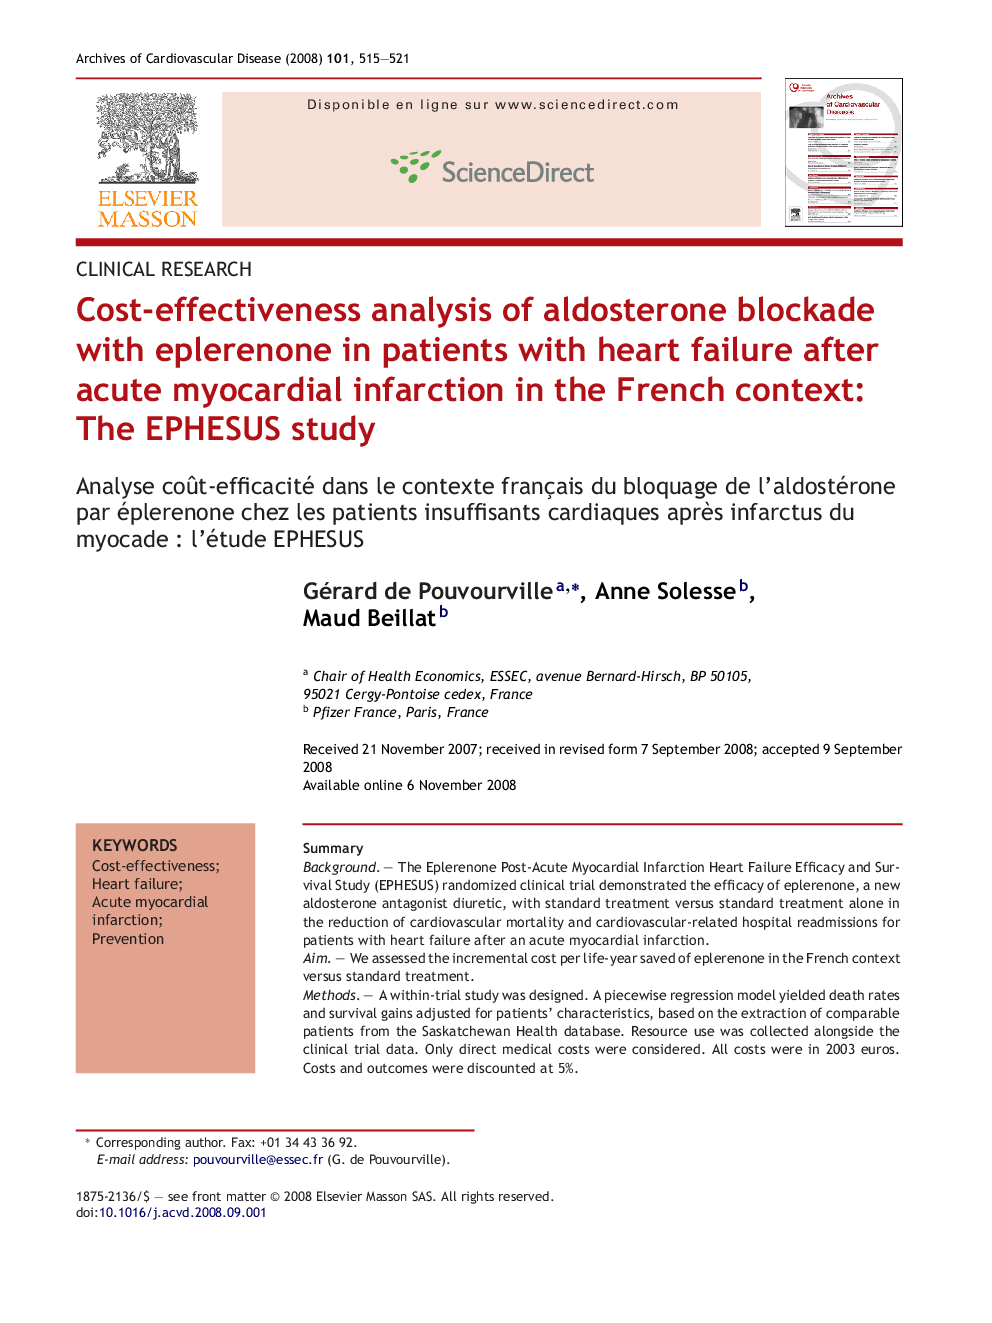 Cost-effectiveness analysis of aldosterone blockade with eplerenone in patients with heart failure after acute myocardial infarction in the French context: The EPHESUS study